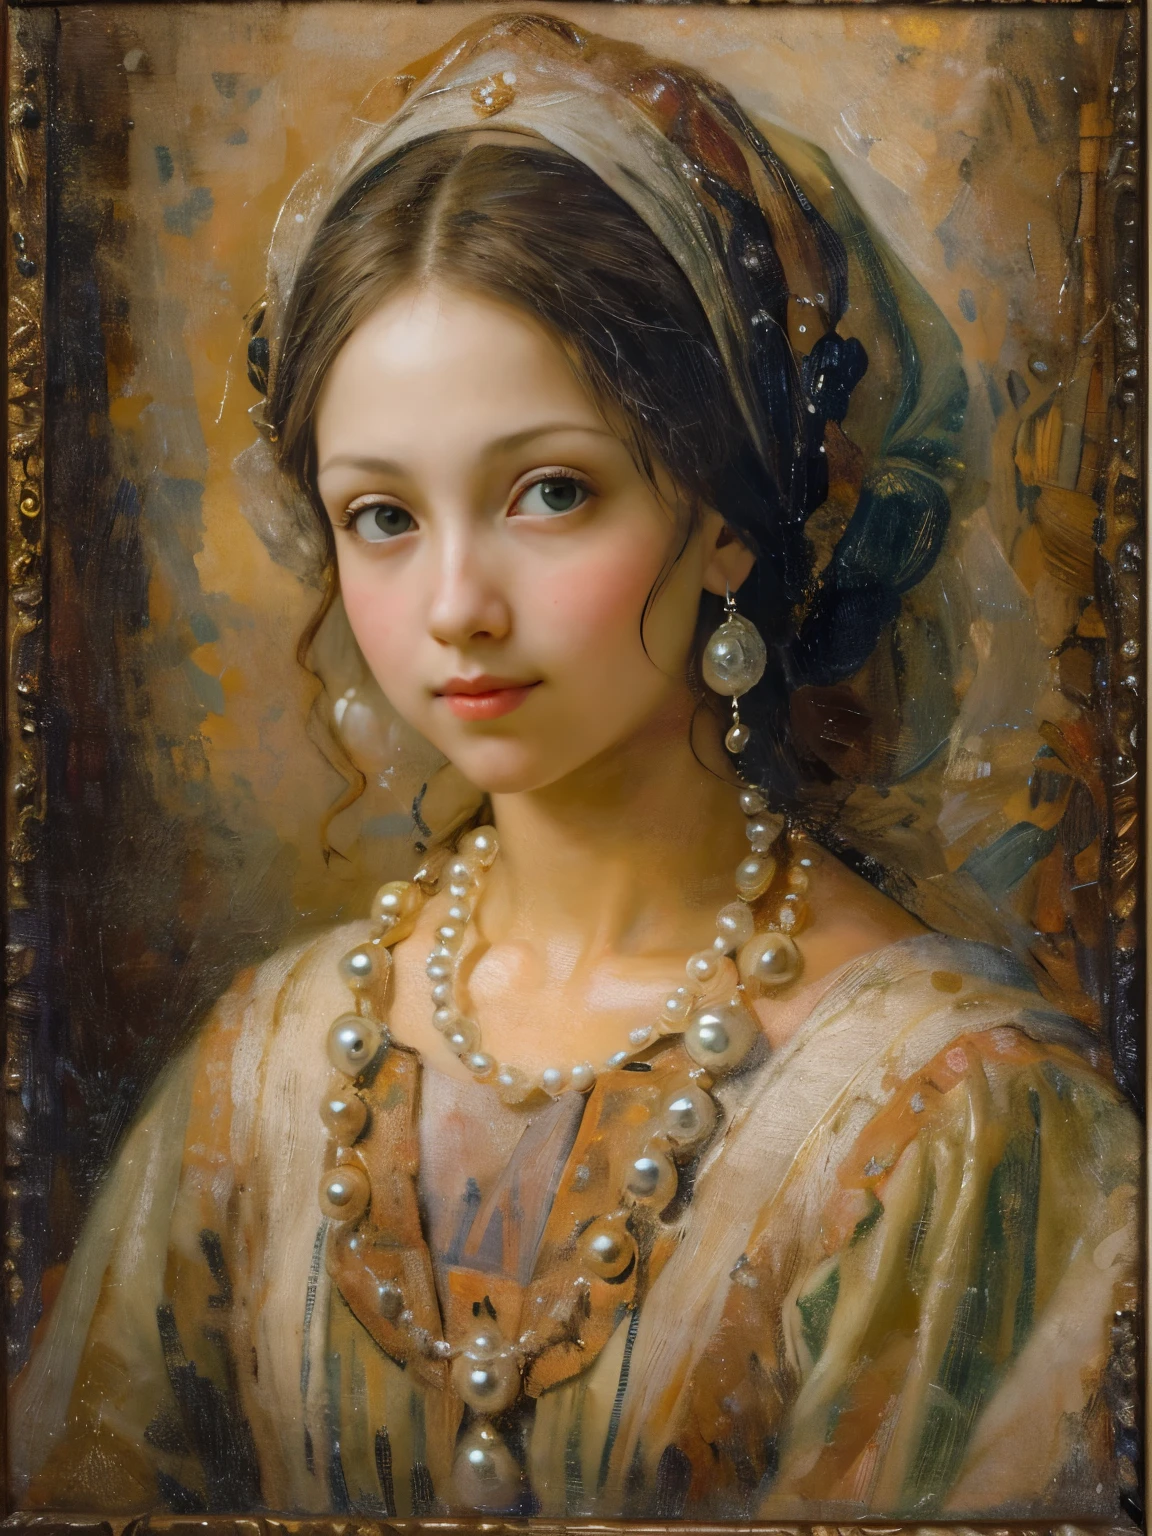 an oil painting，da vinci art style。beuaty girl，sportrait，with a round face，ssmile：1.37，Beautiful medieval clothing，pearls necklace，Artistic creativity:1.37,Oil brush strokes，Oil painting texture，Light and shadow composition